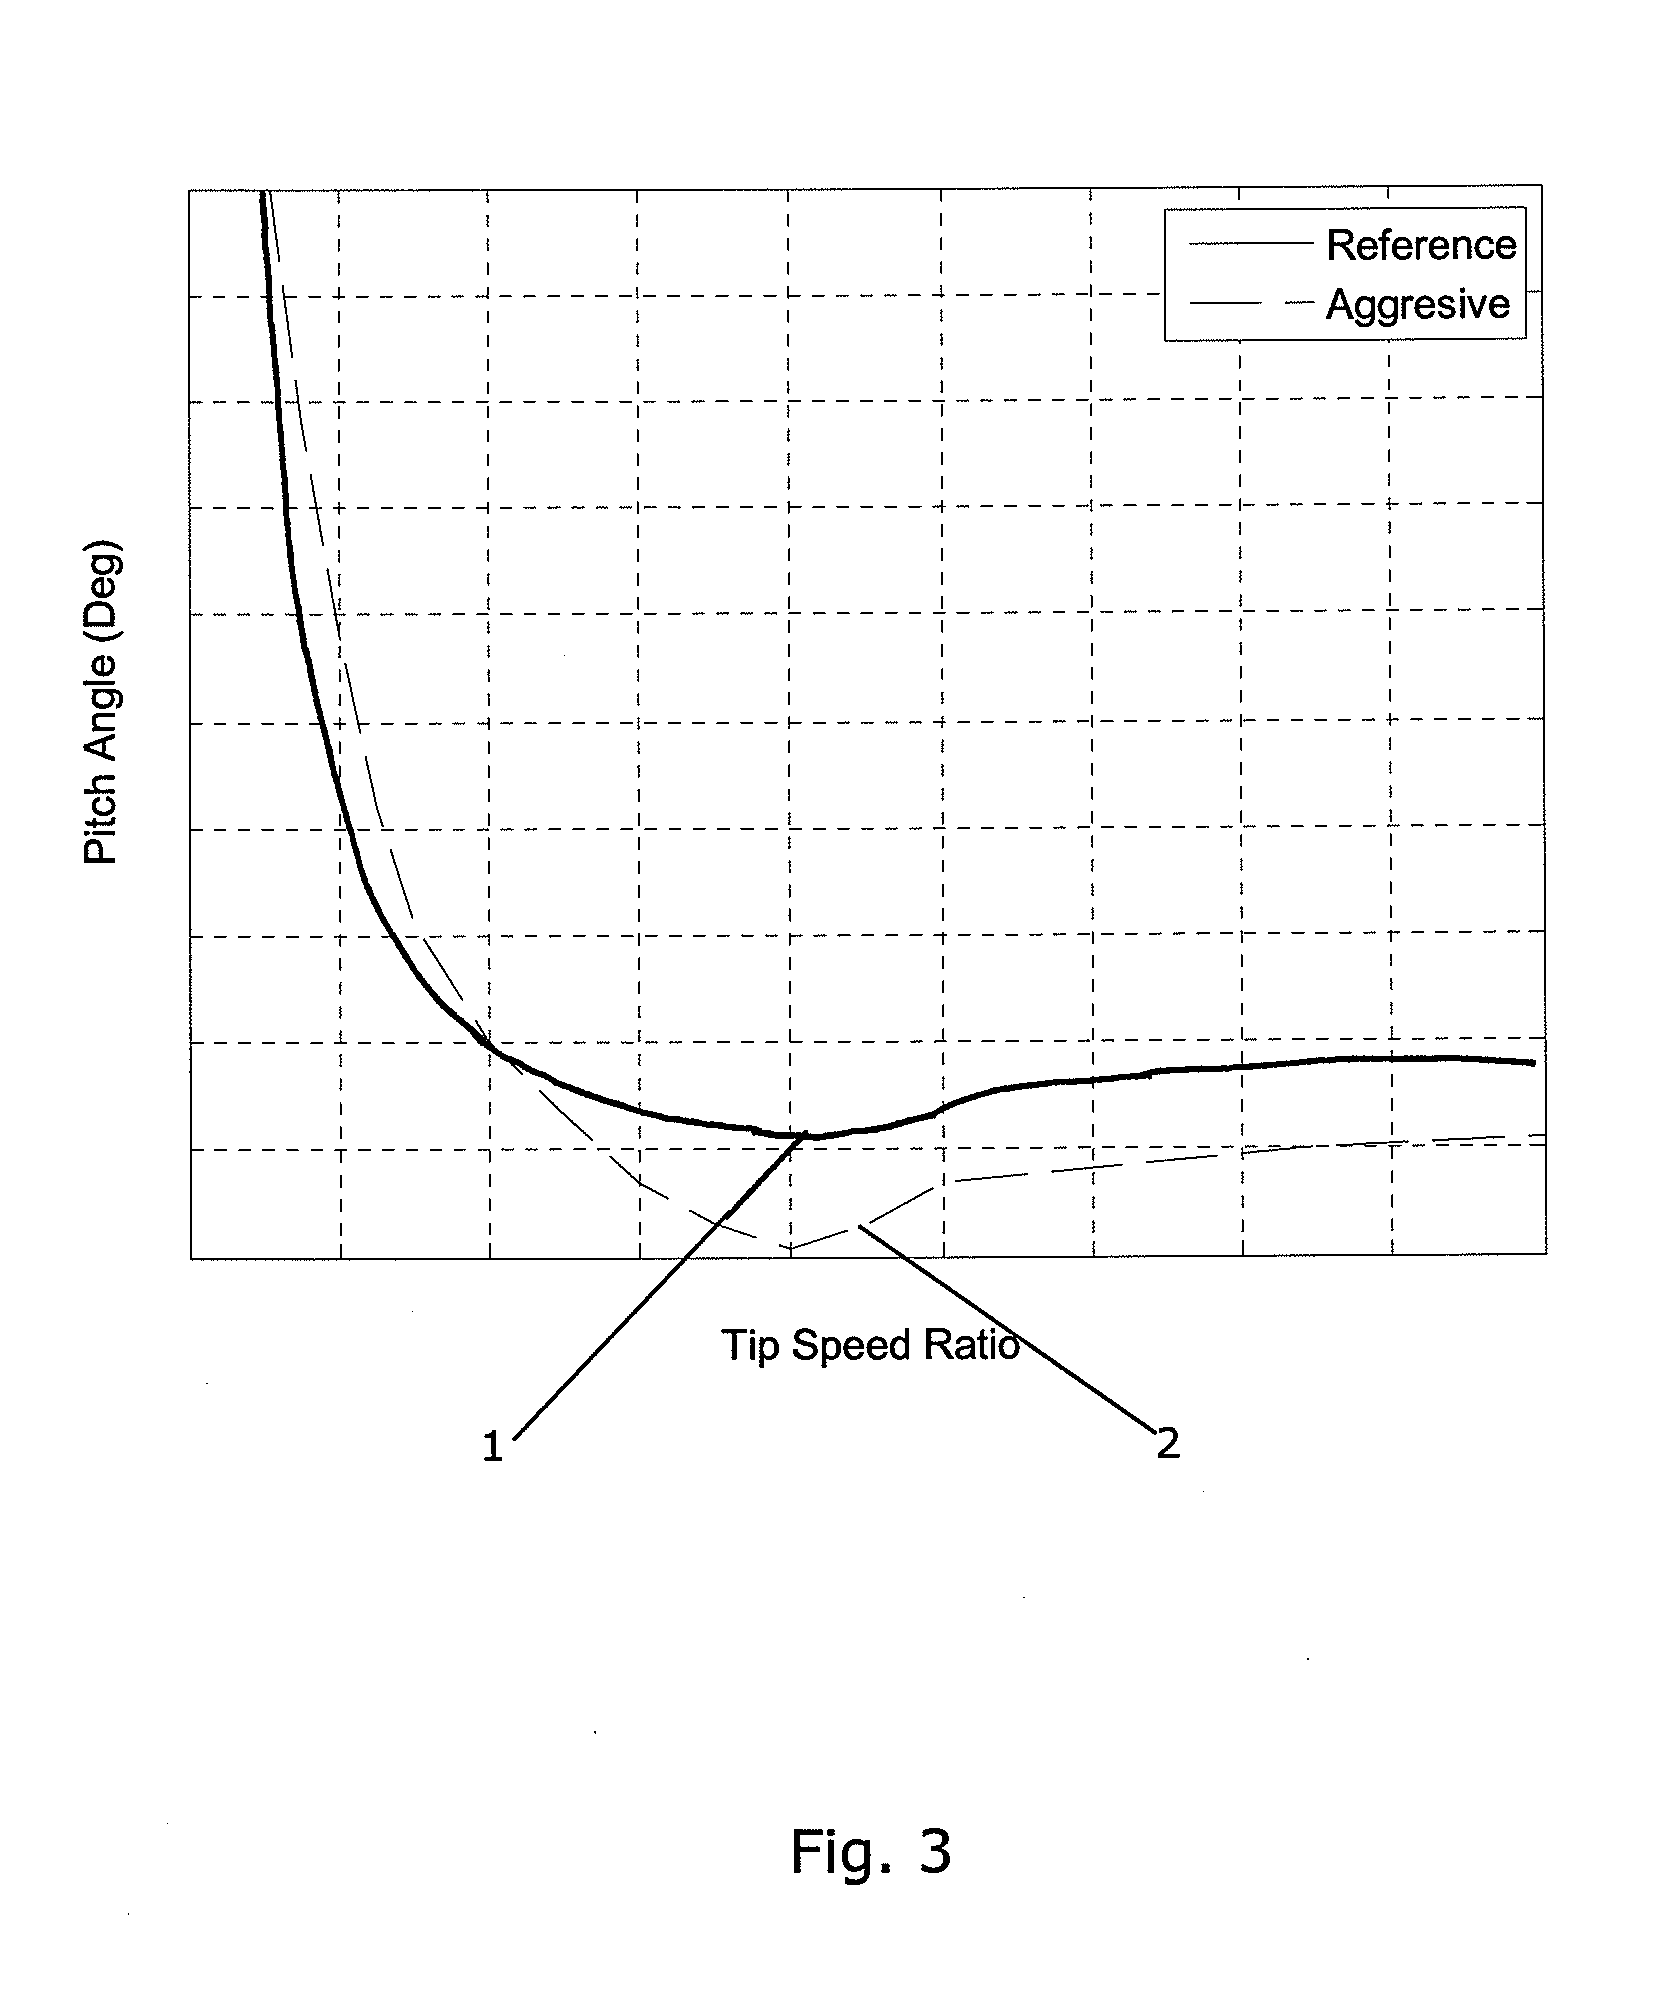 Method for operating a wind turbine at improved power output